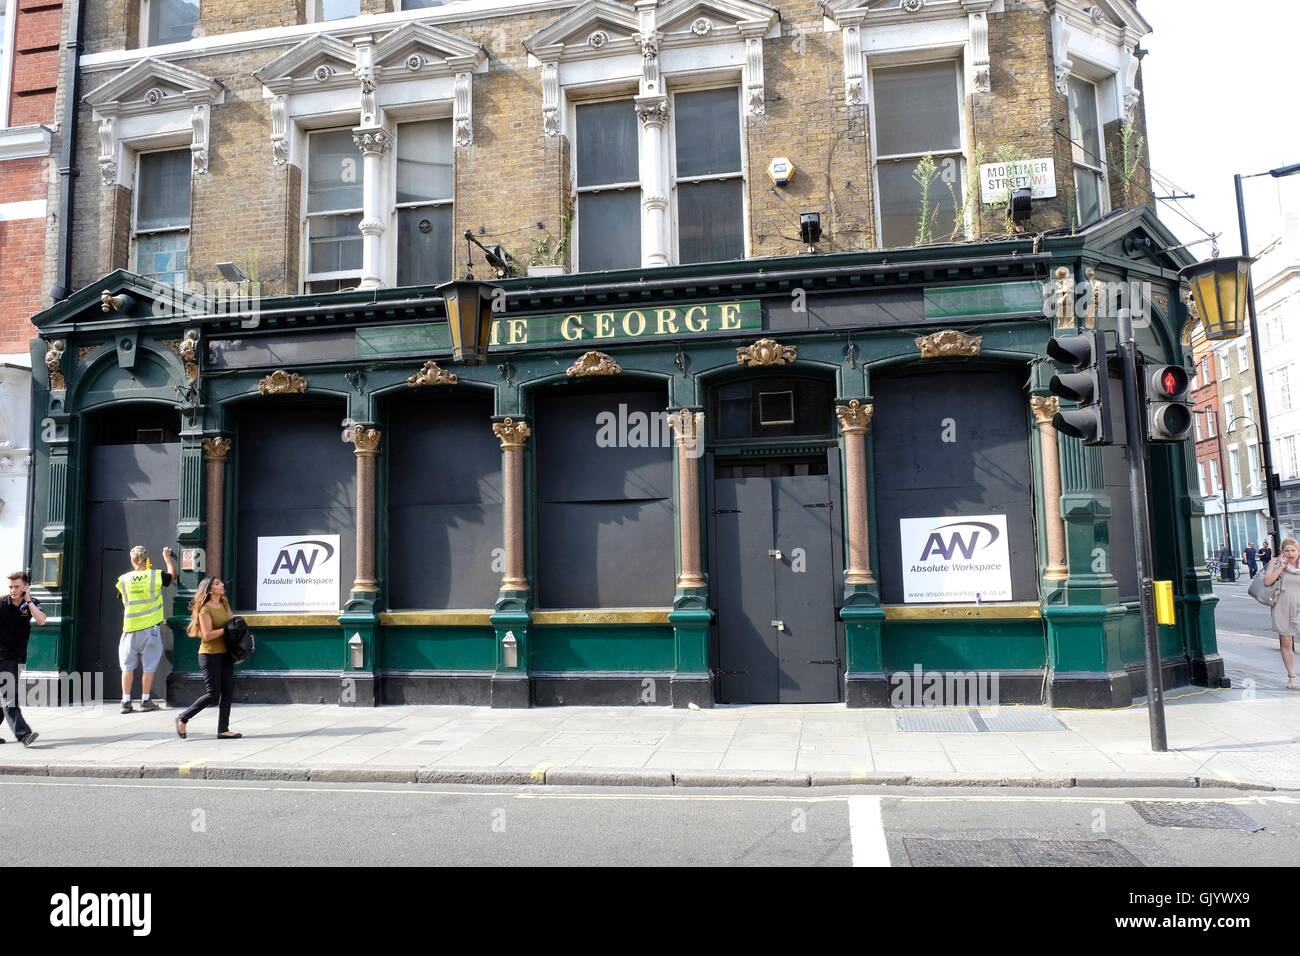 A general view of the George, a Victorian style pub in central London, closed down and boarded-up. Stock Photo